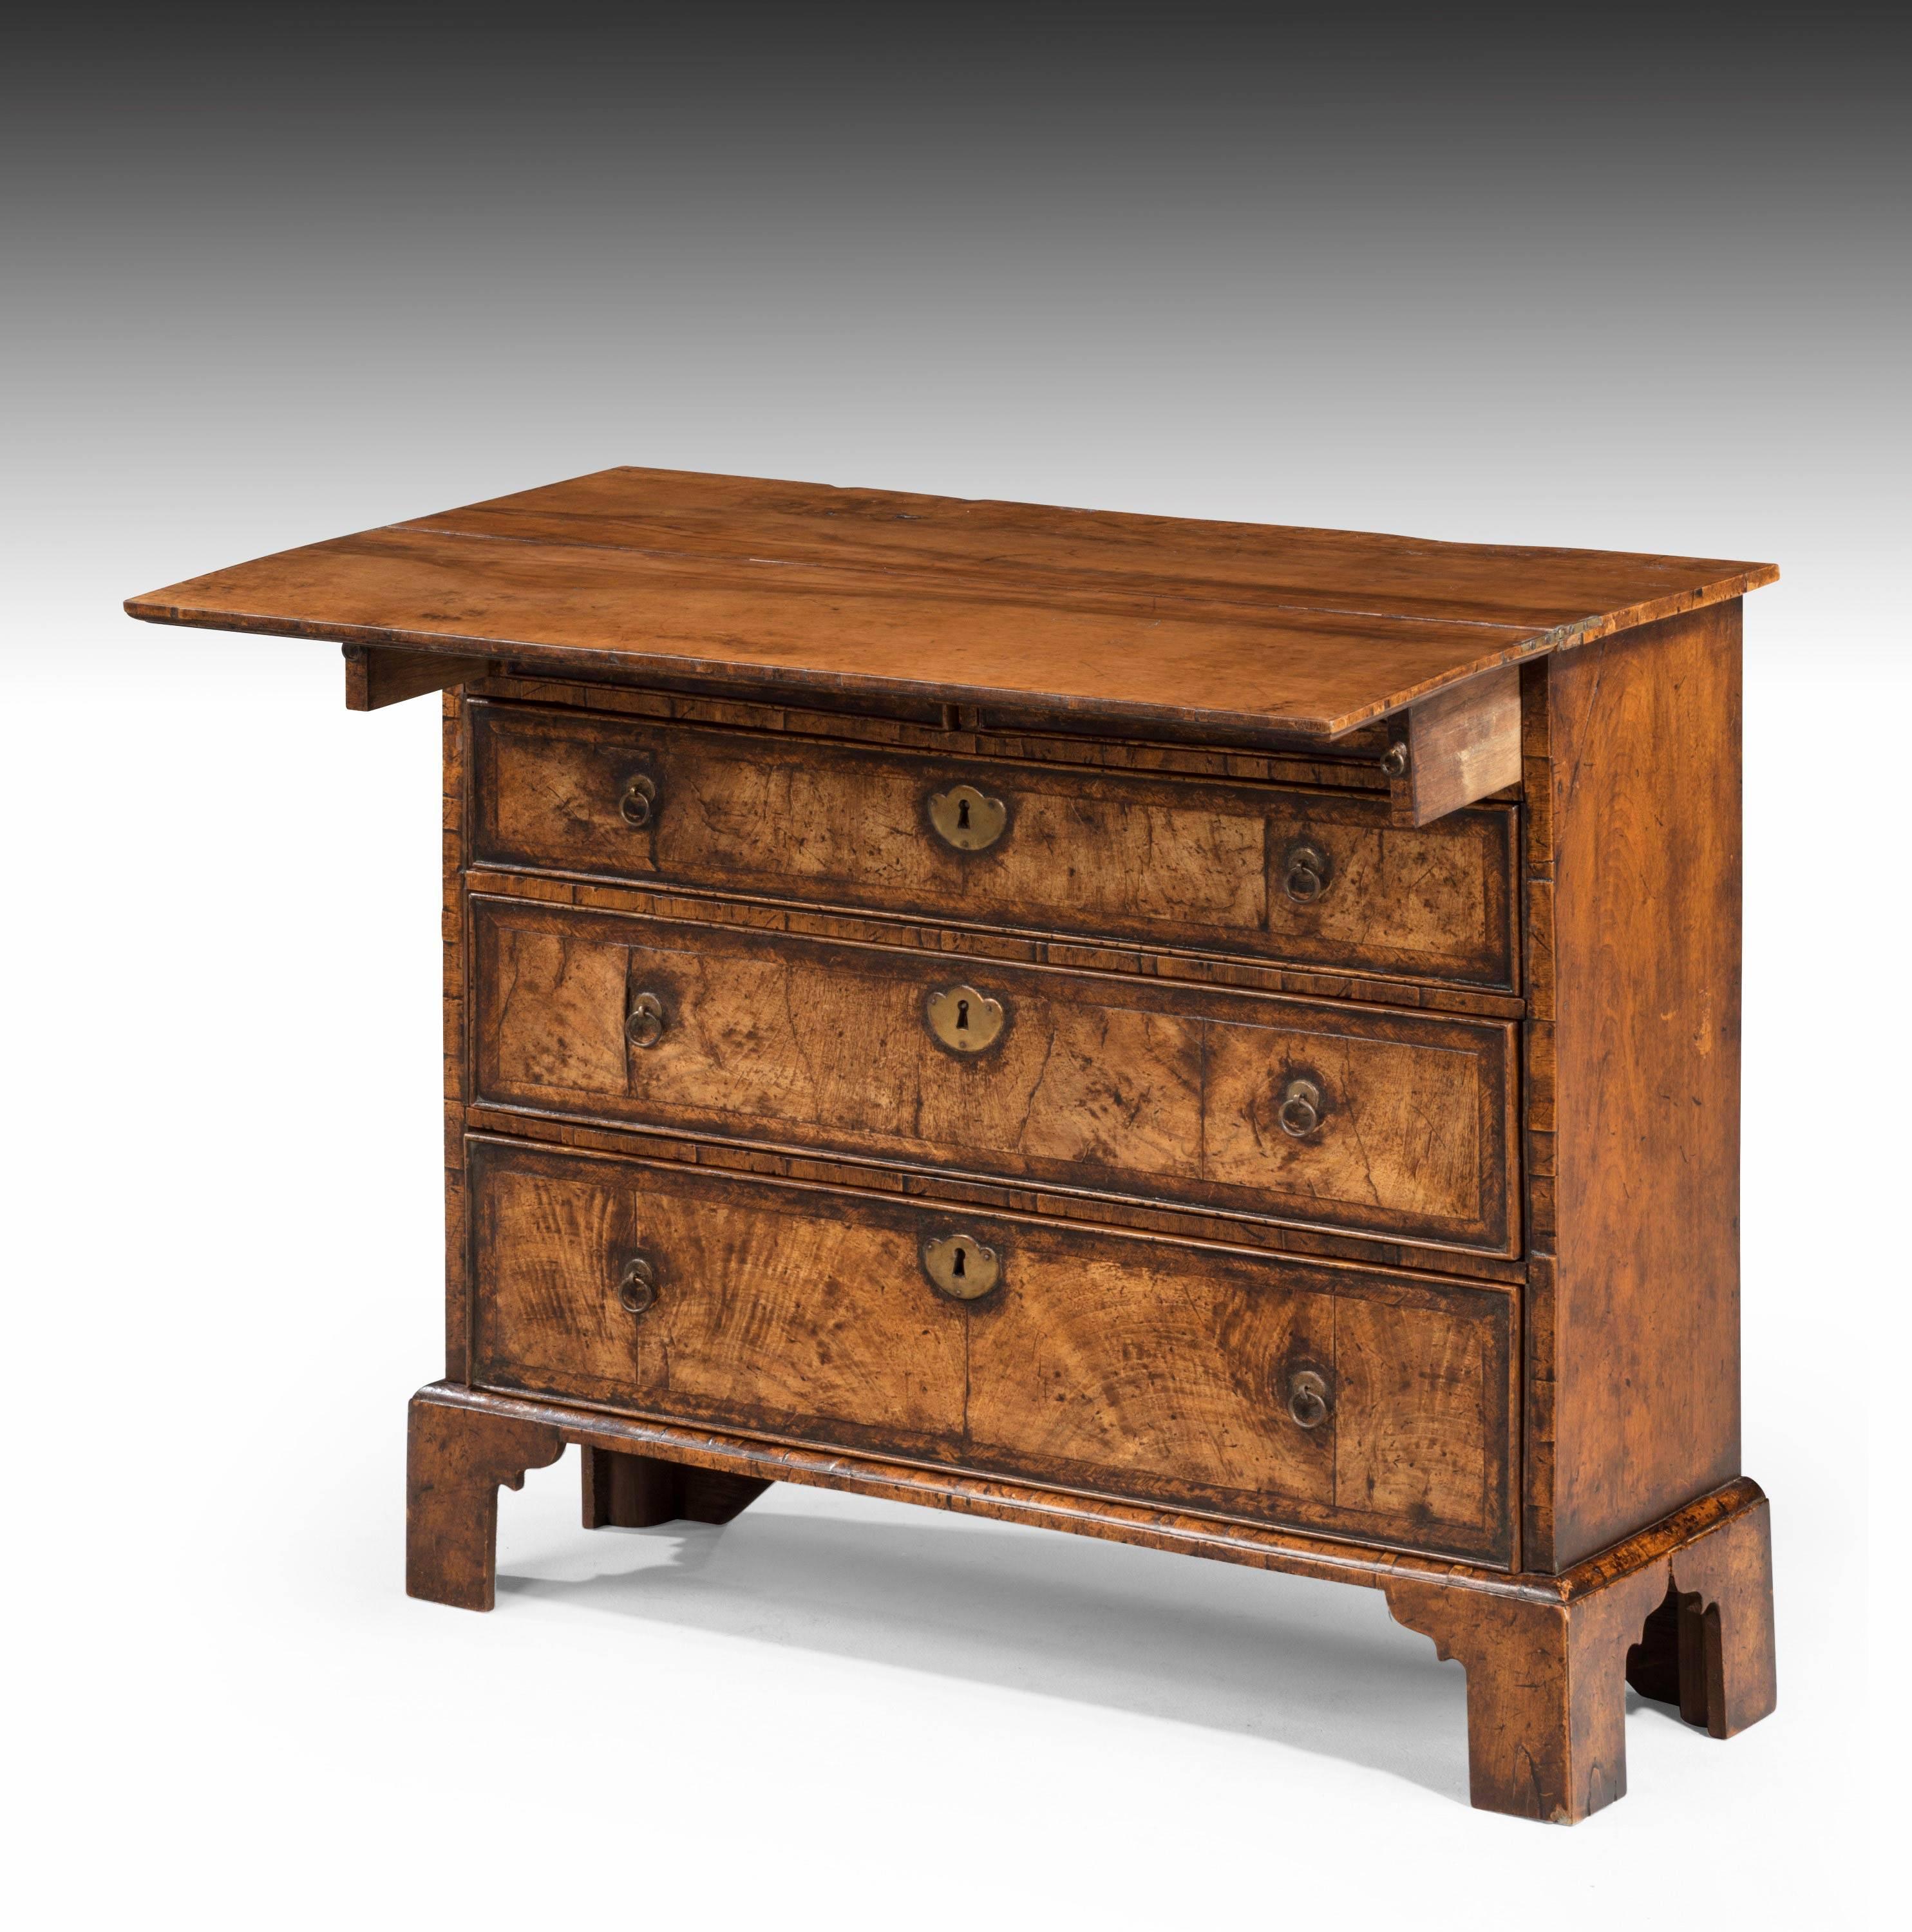 A beautifully figured and constructed walnut bachelor’s chest of Queen Anne design. Evenly faded color to the dark rich honey. The fold over top and the overall carcass of unusually slender proportions. Should be circa 1705-1710 but in fact a fake